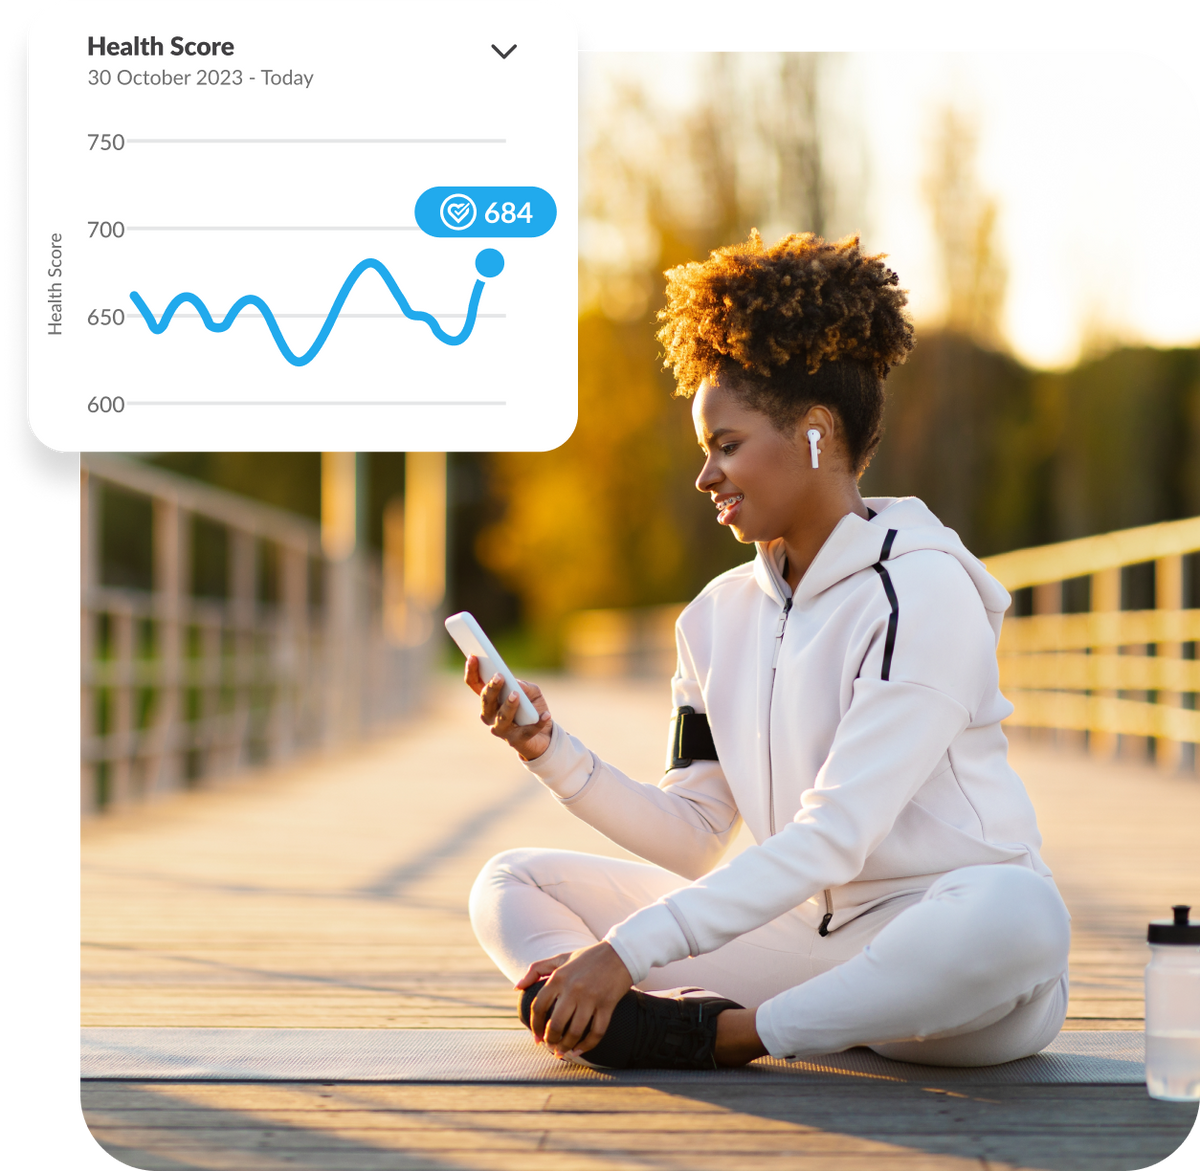 Lady sitting on wooden decking, looking at phone with an example health score graph visible